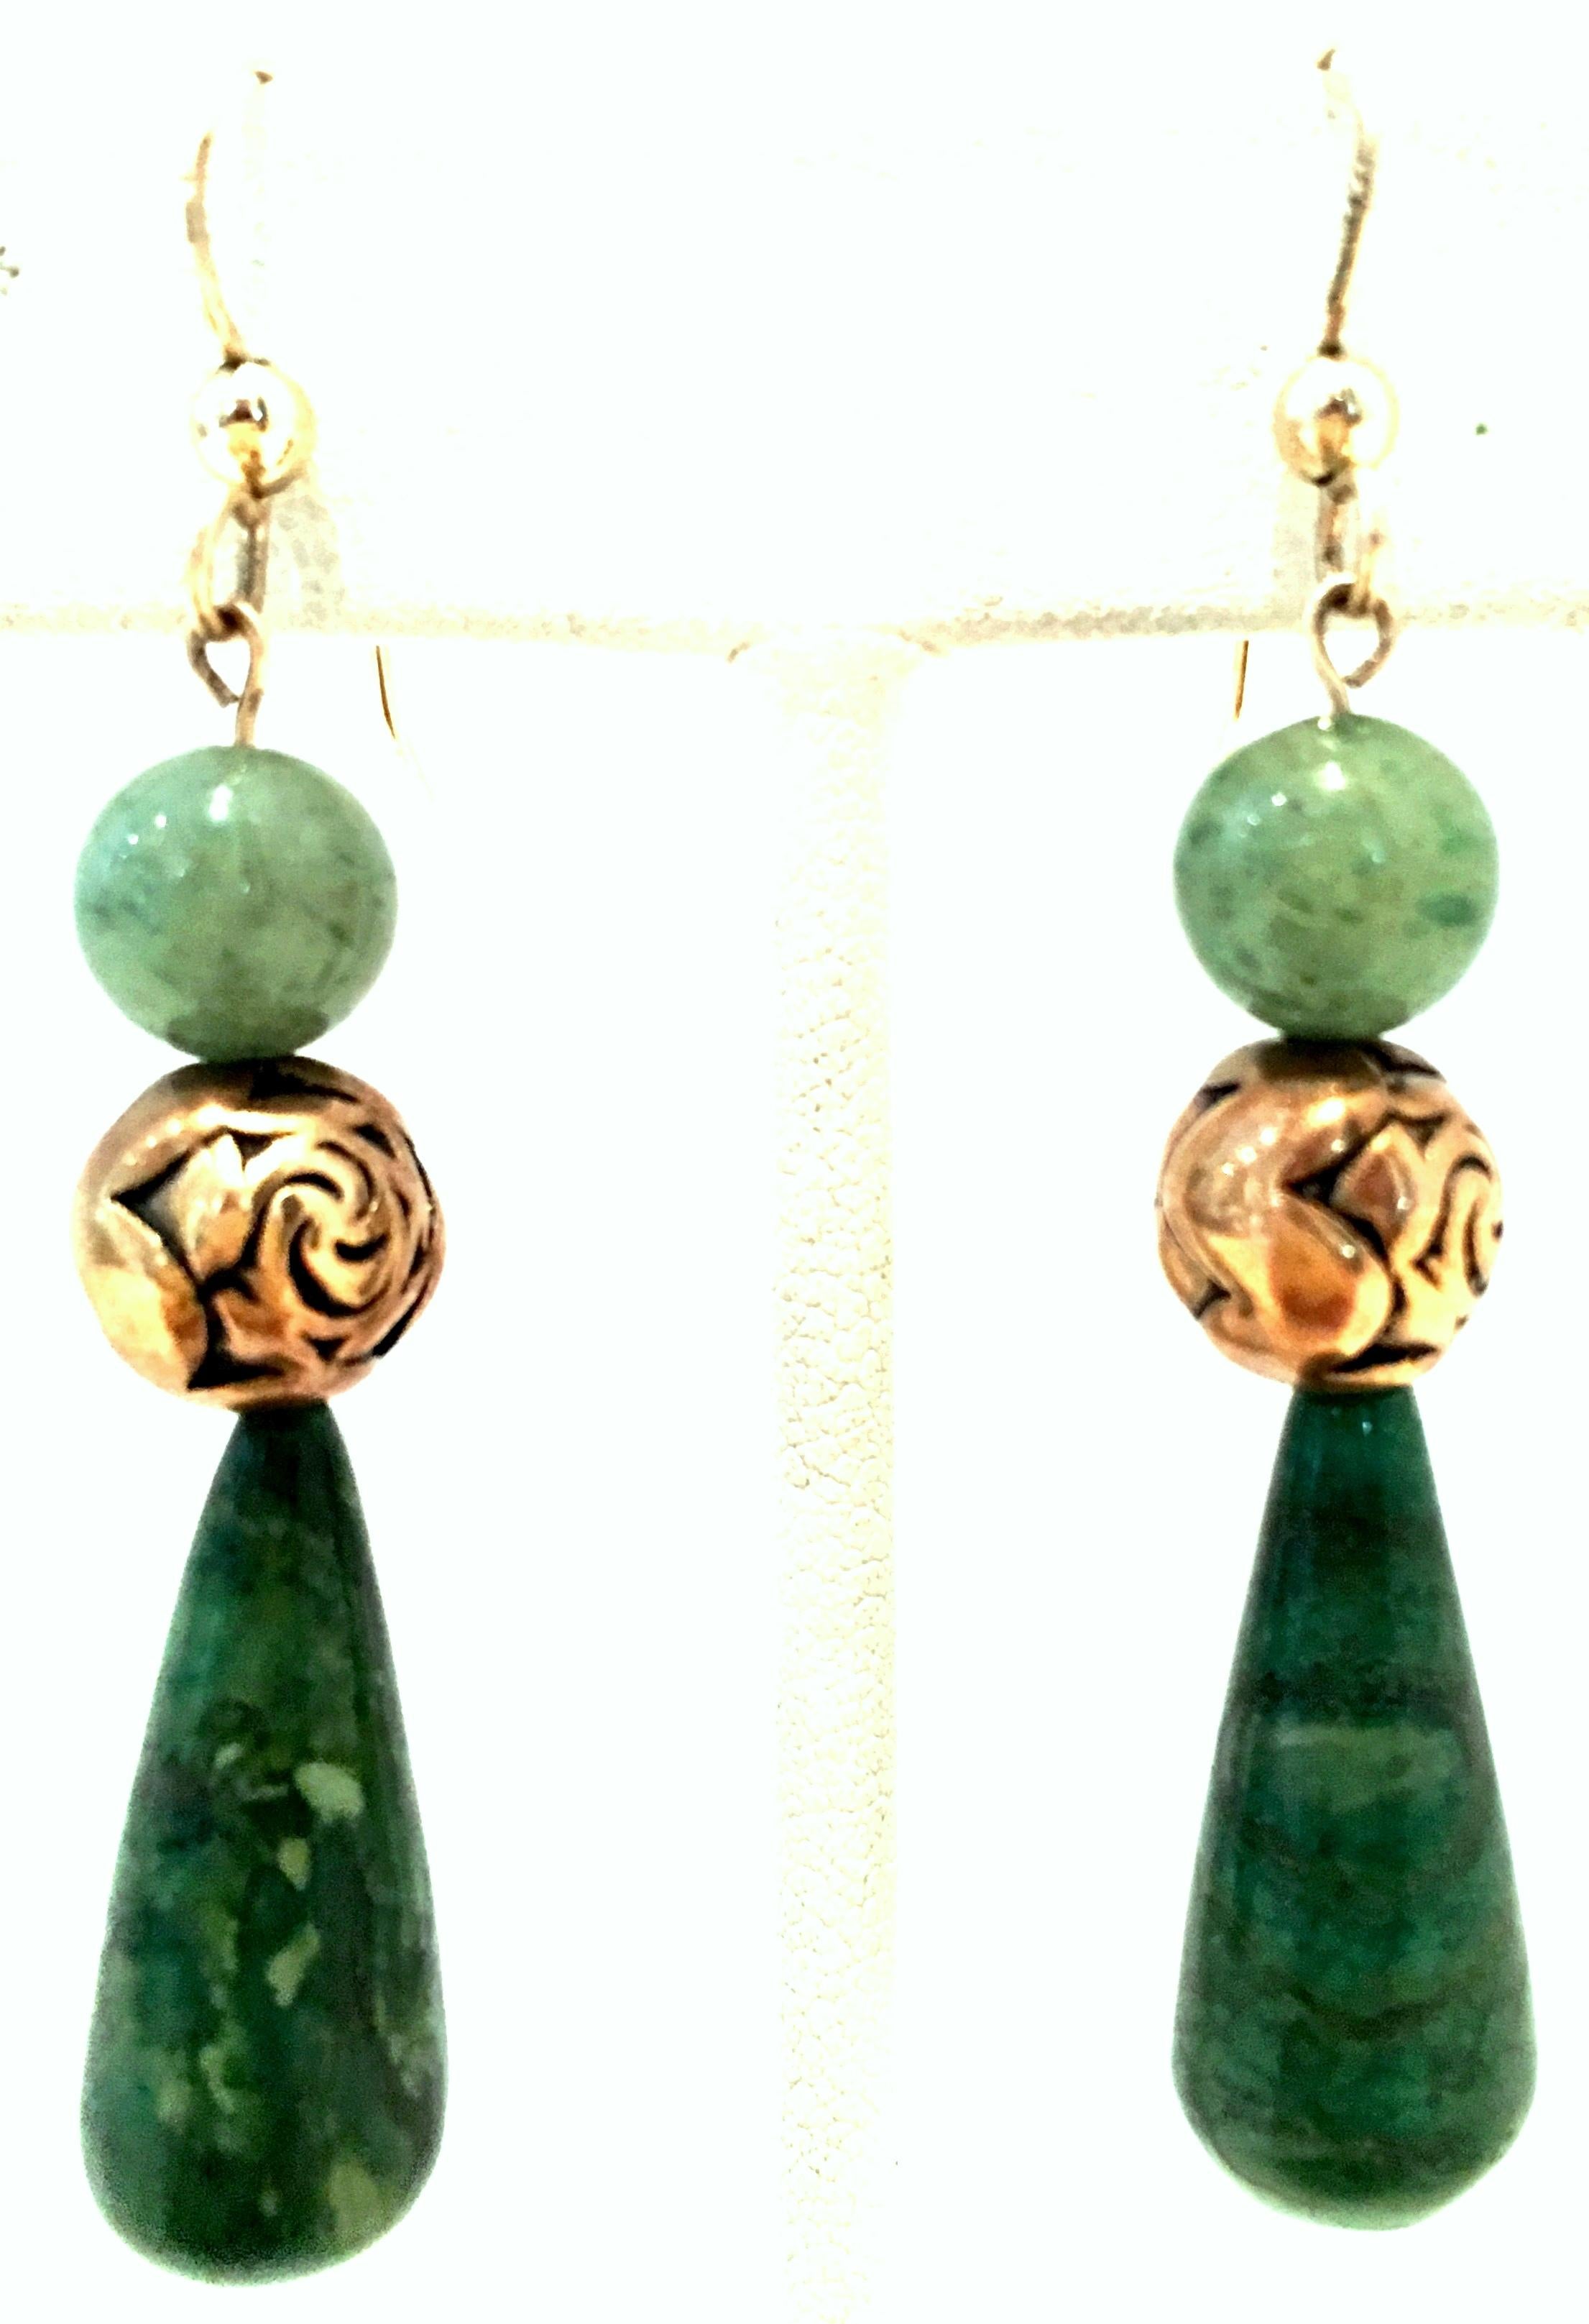 Mid-20th Century 14-K Gold & Jade Drop Earrings. These classic and timeless finely crafted earrings feature polished and smooth green jade with 14K Gold wire posts. The teardrop size is approximately, .75